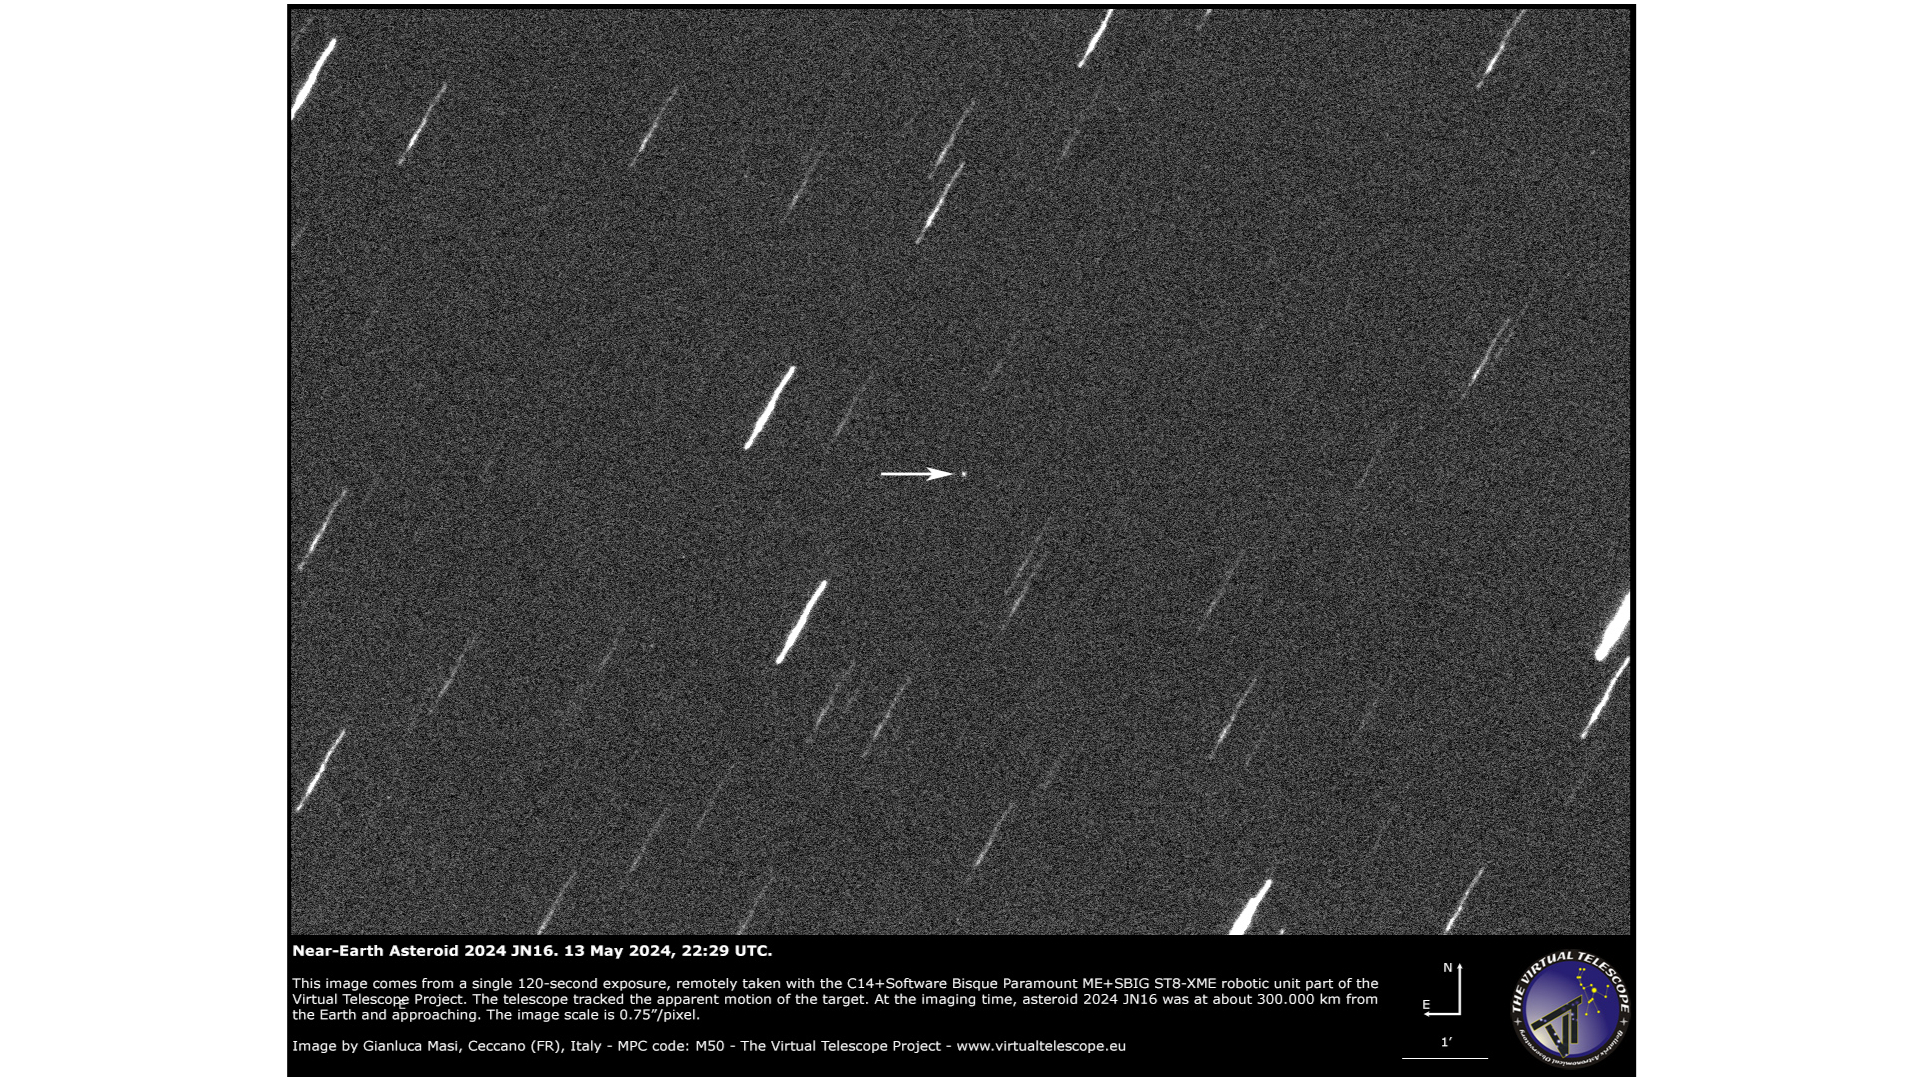 telescope photo of the sky, showing white streaks that represent stars and a small white dot that's an asteroid